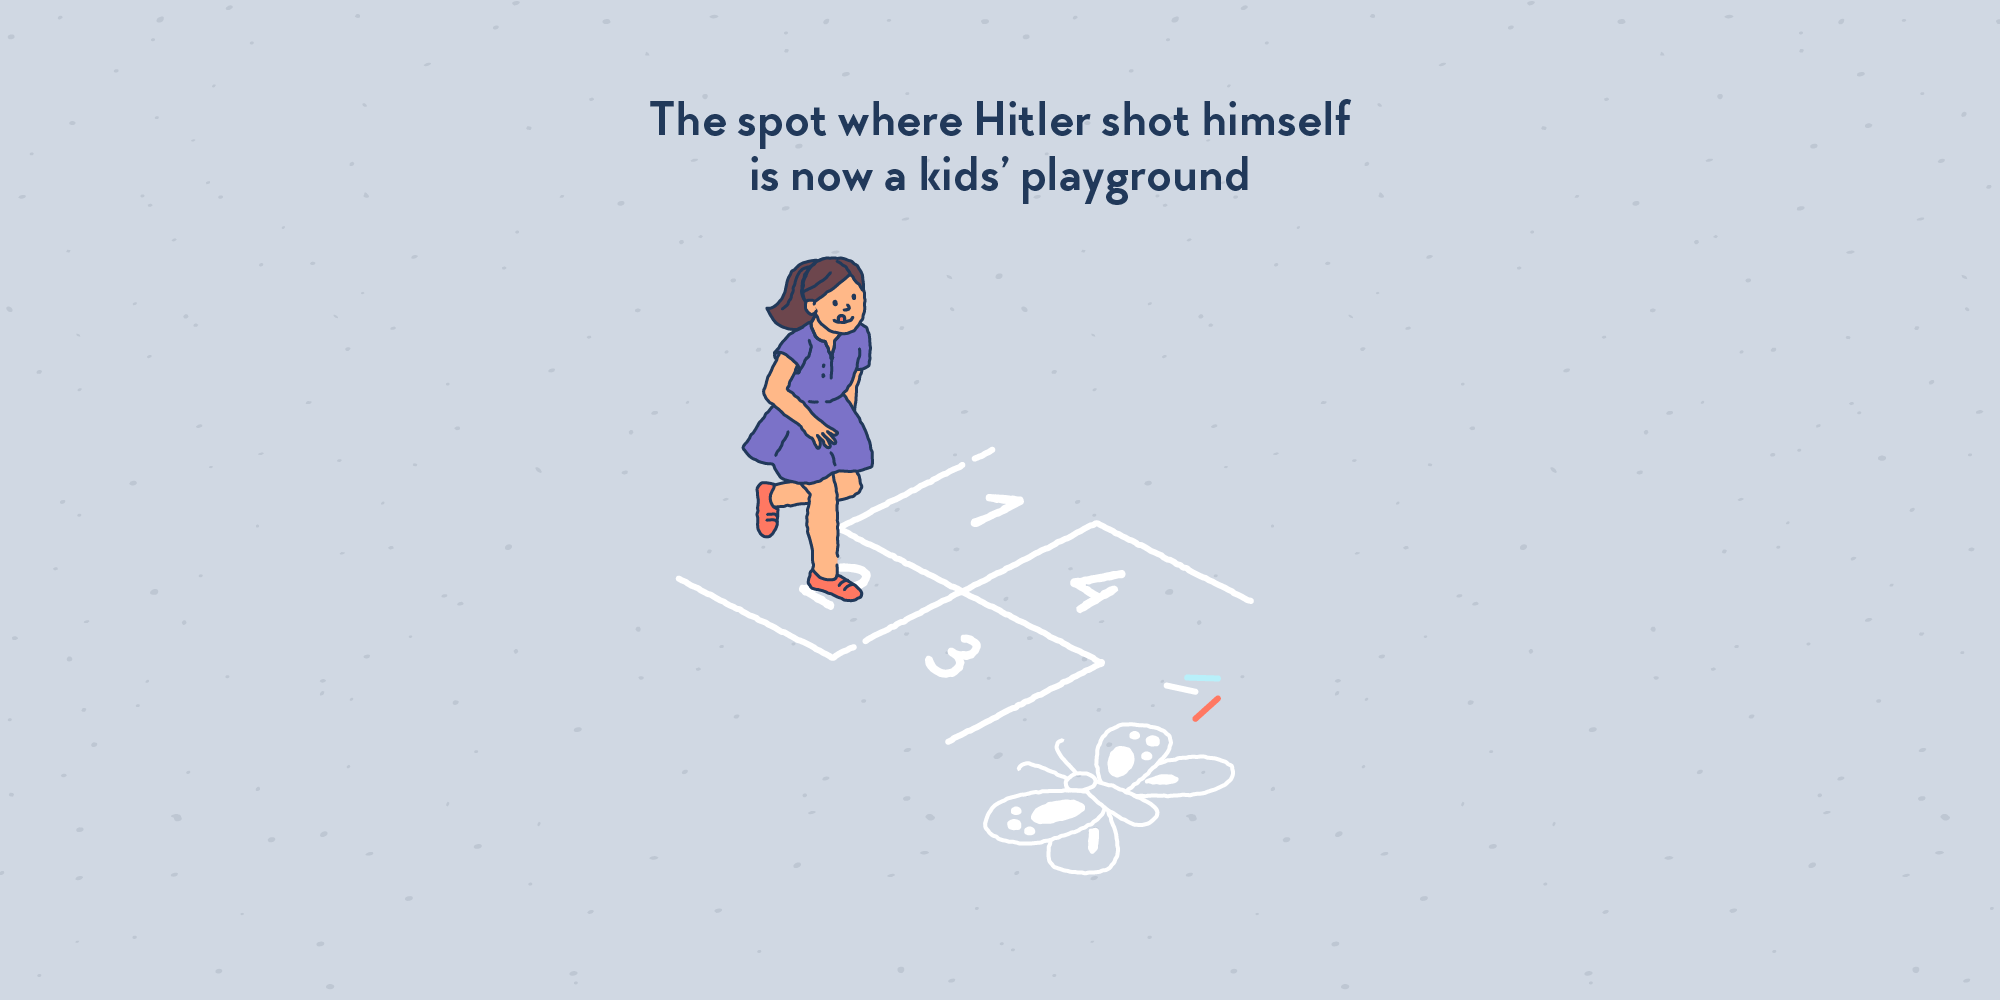 A young girl playing hopscotch outside. The chalk lines on the floor look like a swastika.